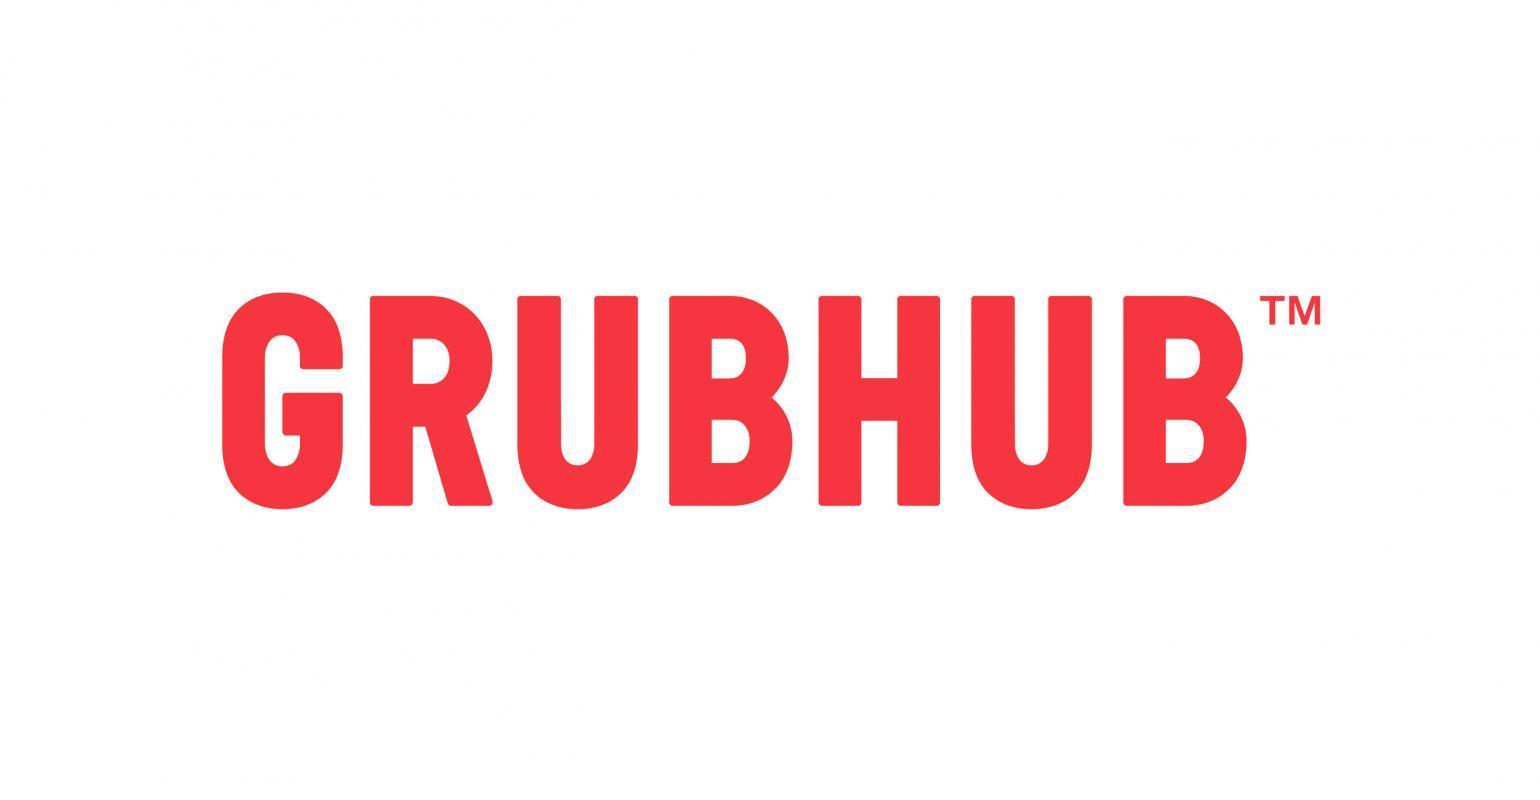 Grubhub sued by Washington, D.C. for excessive fees and false advertising - Restaurant Hospitality